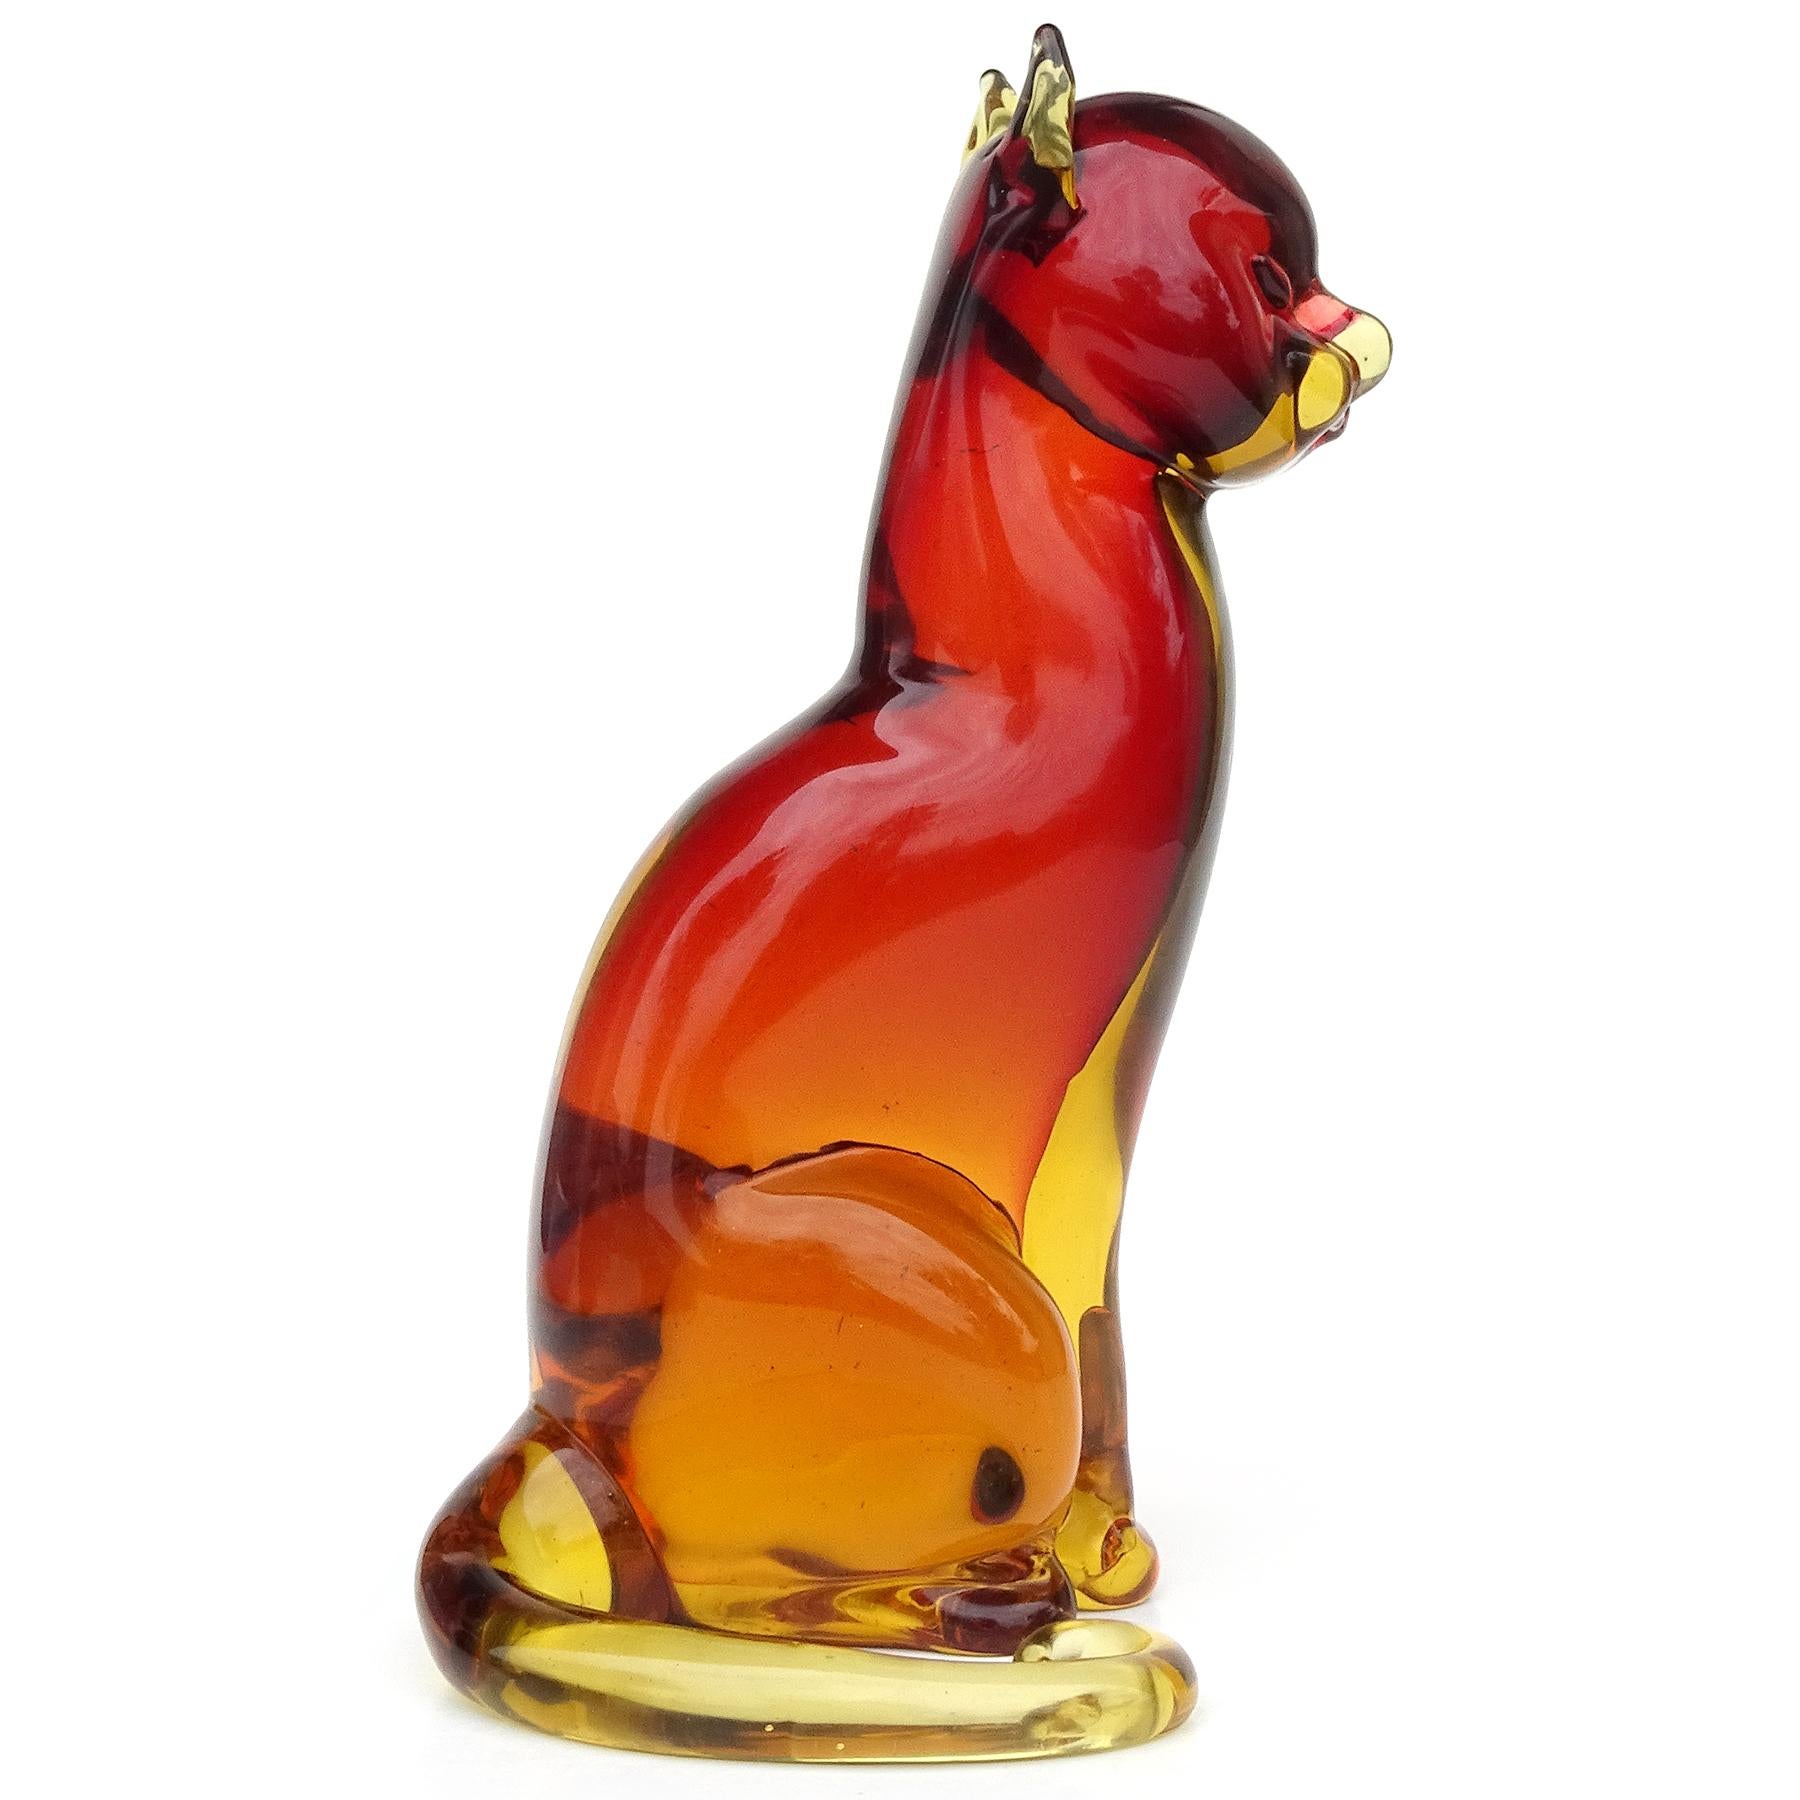 Beautiful and rare, vintage Murano hand blown Sommerso red orange and golden yellow honey color Italian art glass standing kitty cat sculpture. Documented to designer Archimede Seguso, with worn partial red 